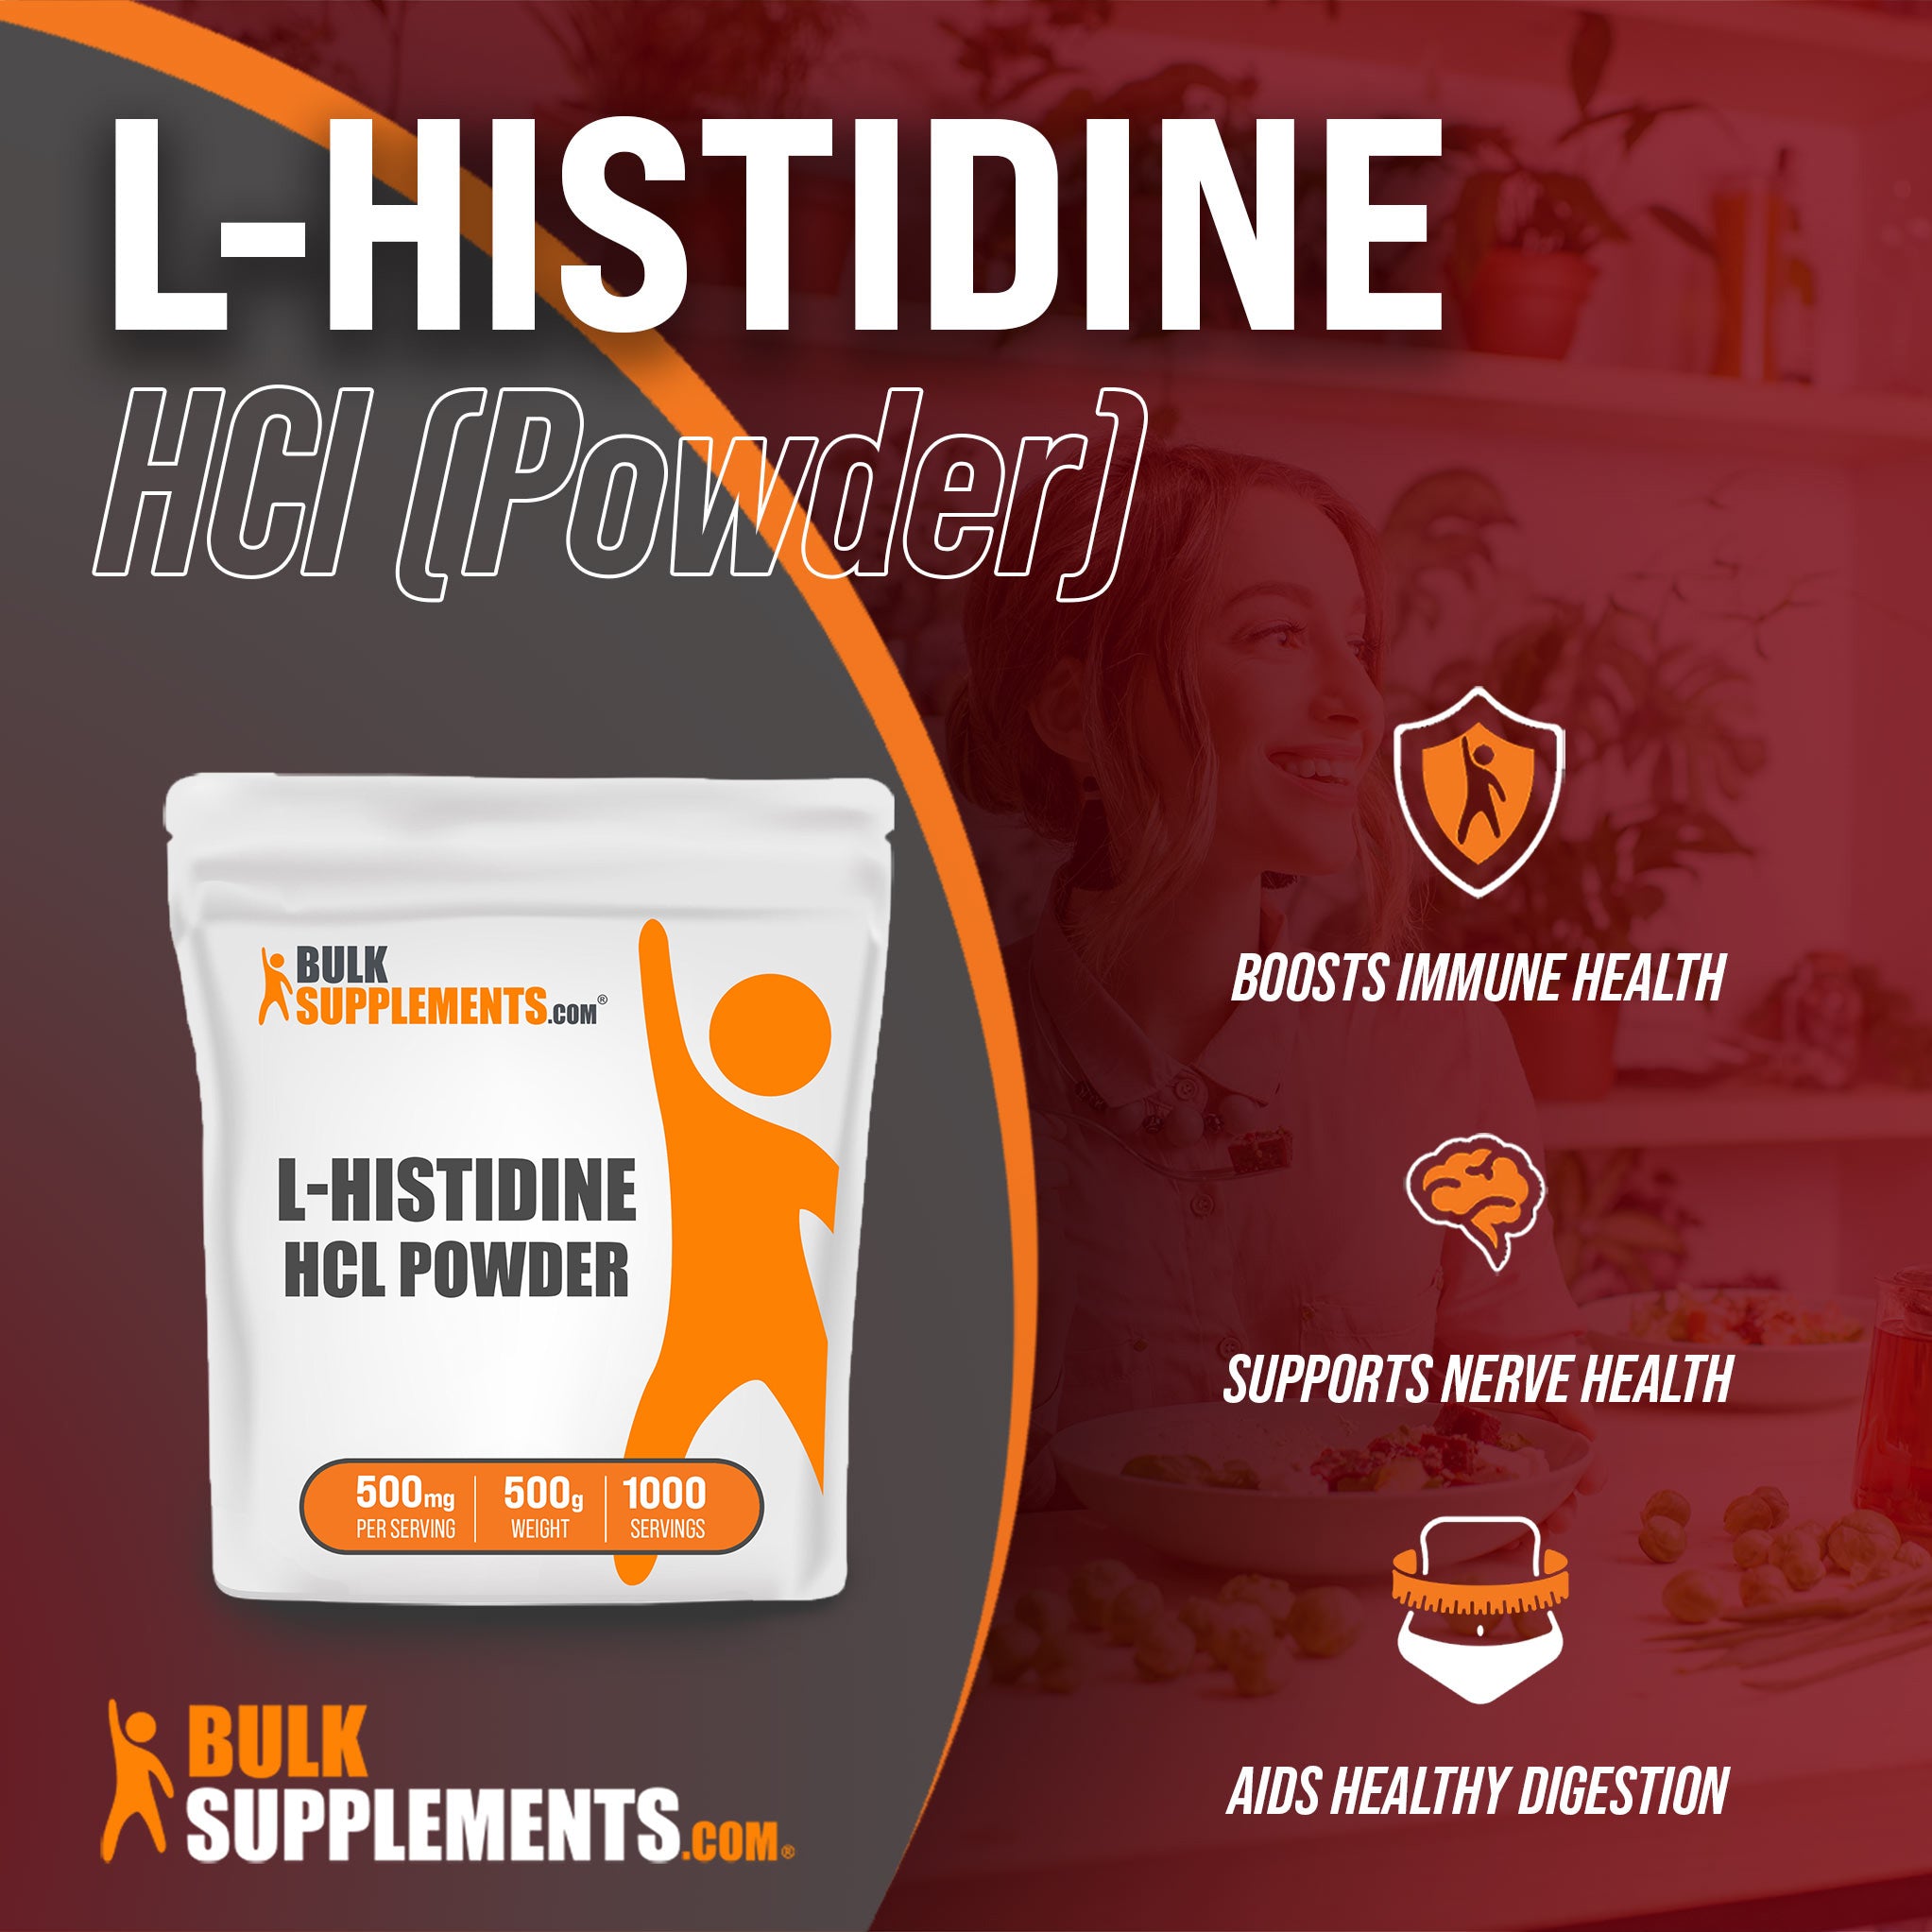 Benefits of L-Histidine HCl: boosts immune health, supports nerve health, aids healthy digestion